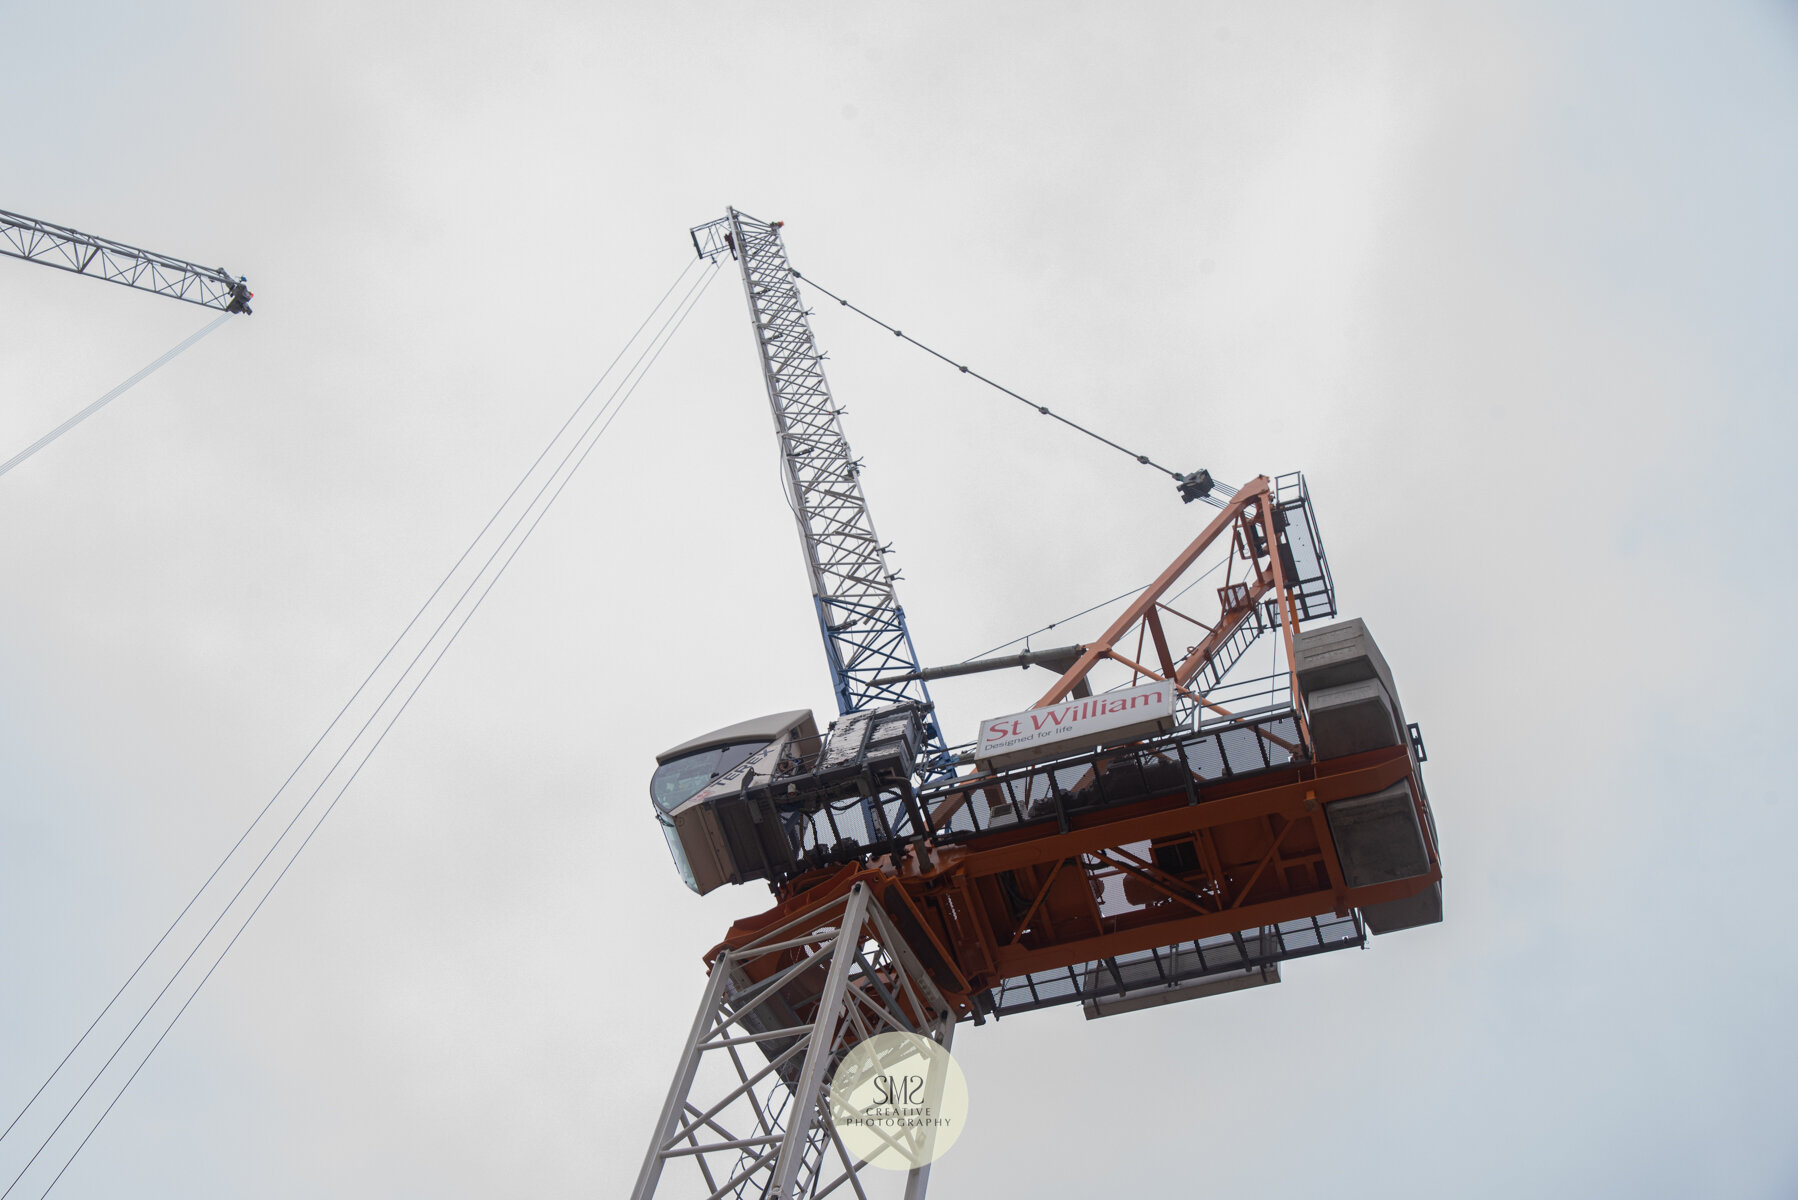  Looking up at one of the two cranes. 